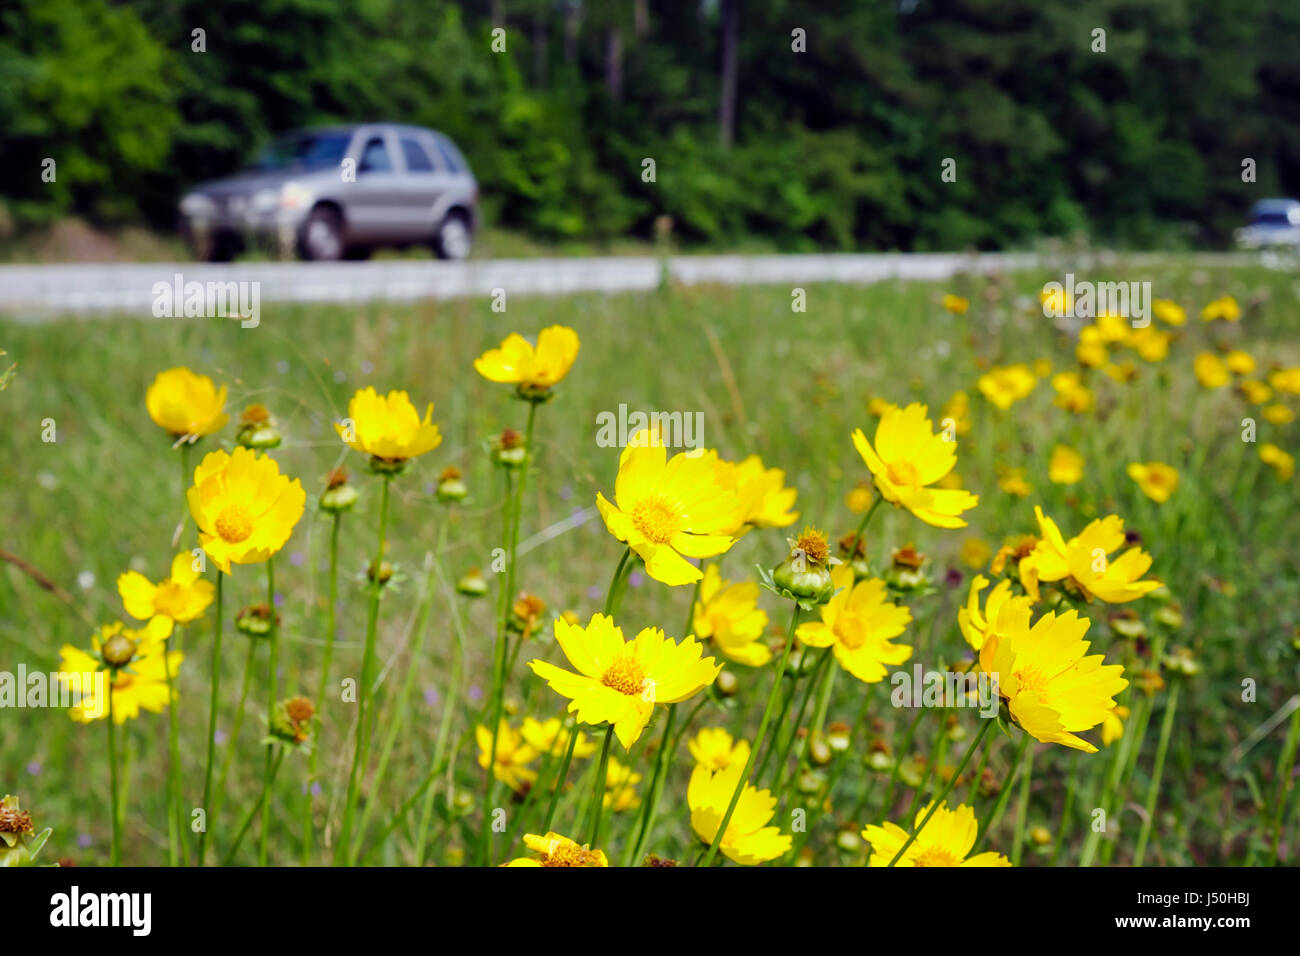 Alabama Millry,State Road 17,wild flower flowers,coreopsis,yellow,grandiflora,blooming,plant,perennial,blossom,visitors travel traveling tour tourist Stock Photo